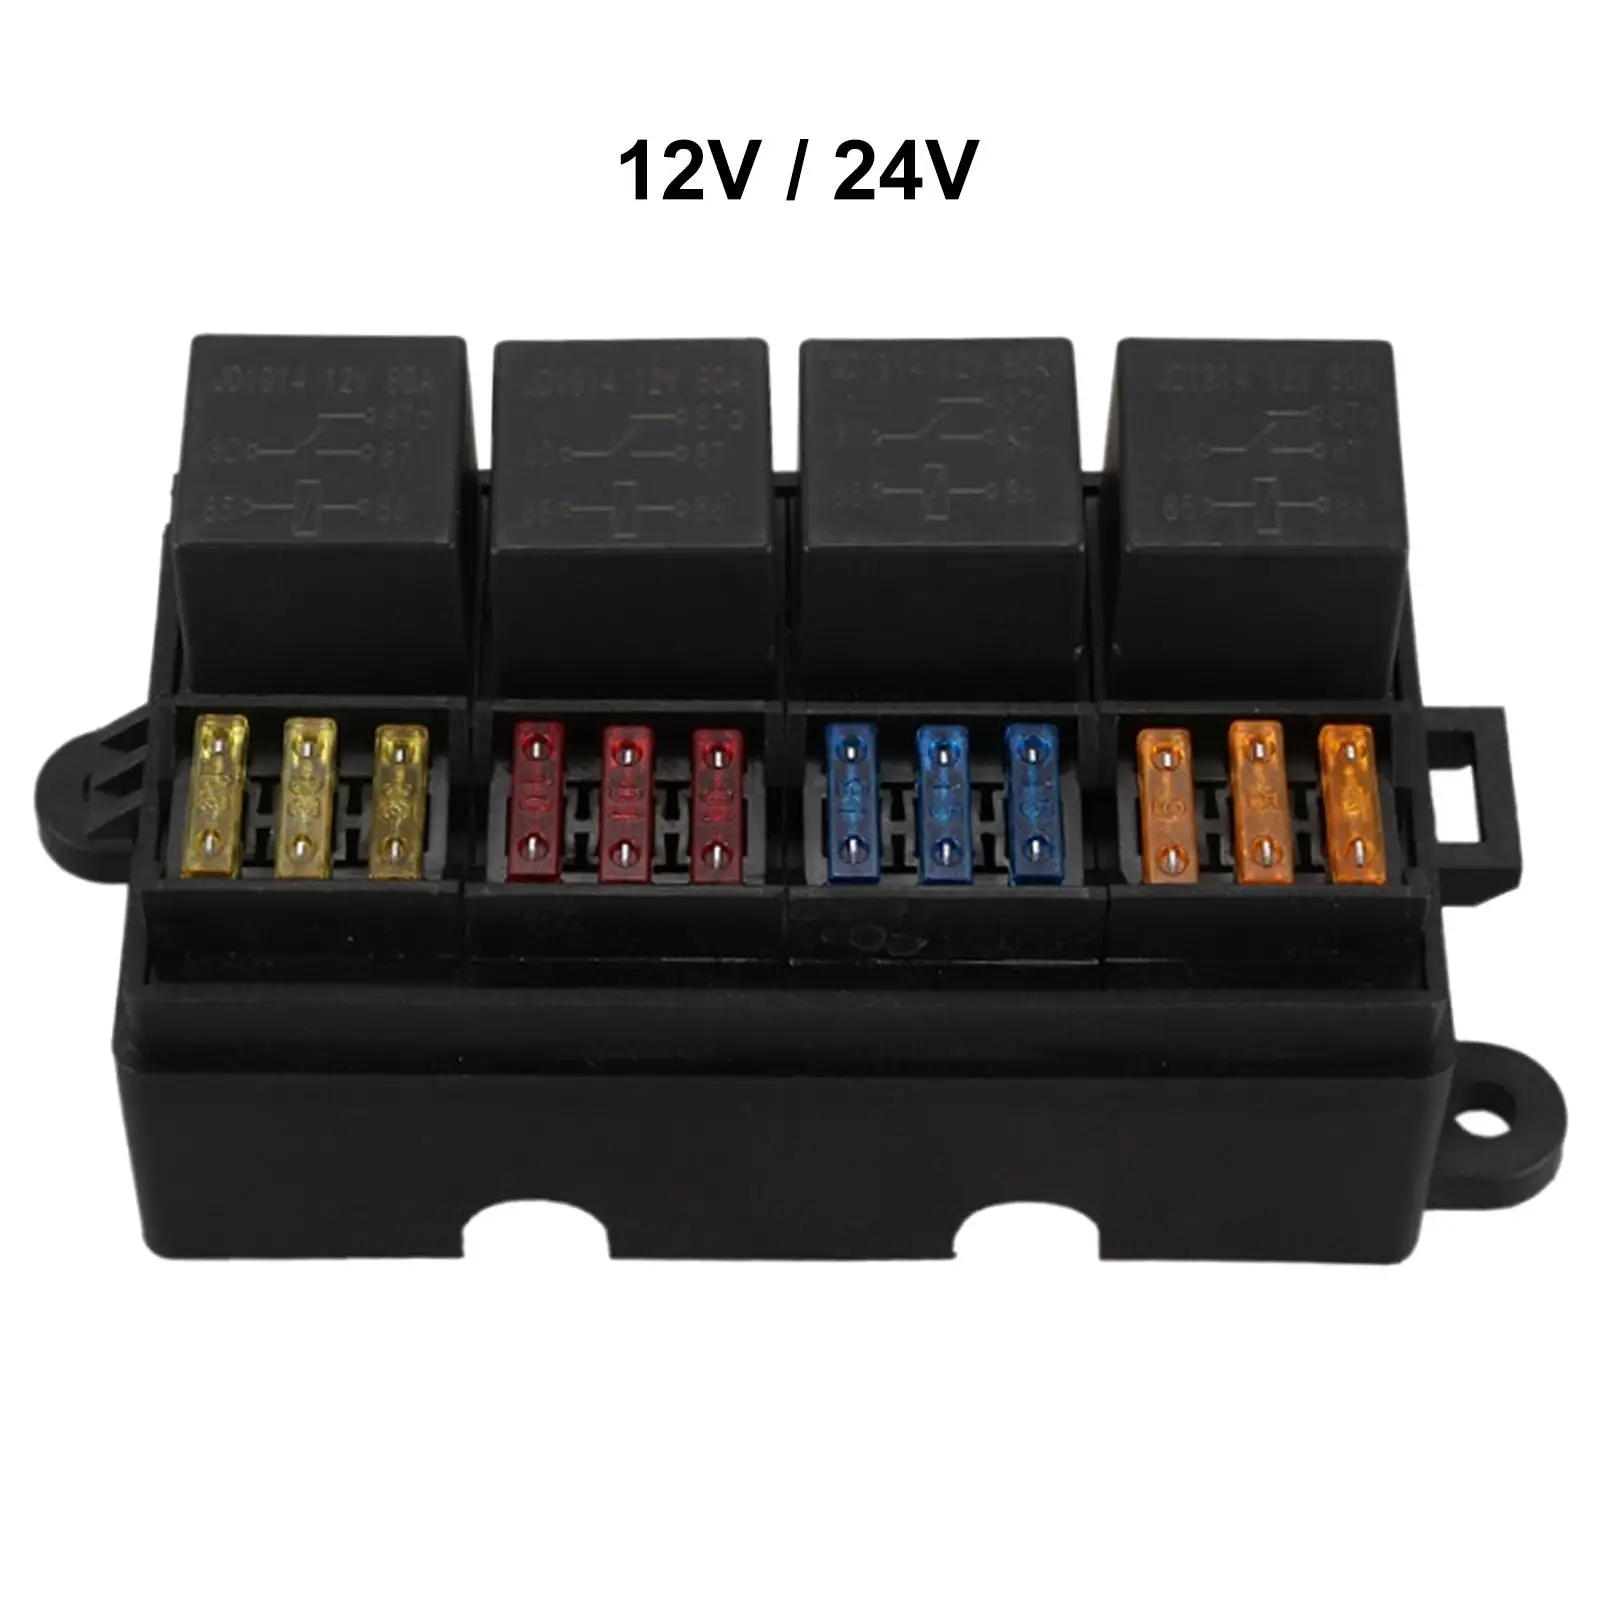 Automotive Car 12 Way Blade Fuse Holder Box with Spade Terminals Replacement